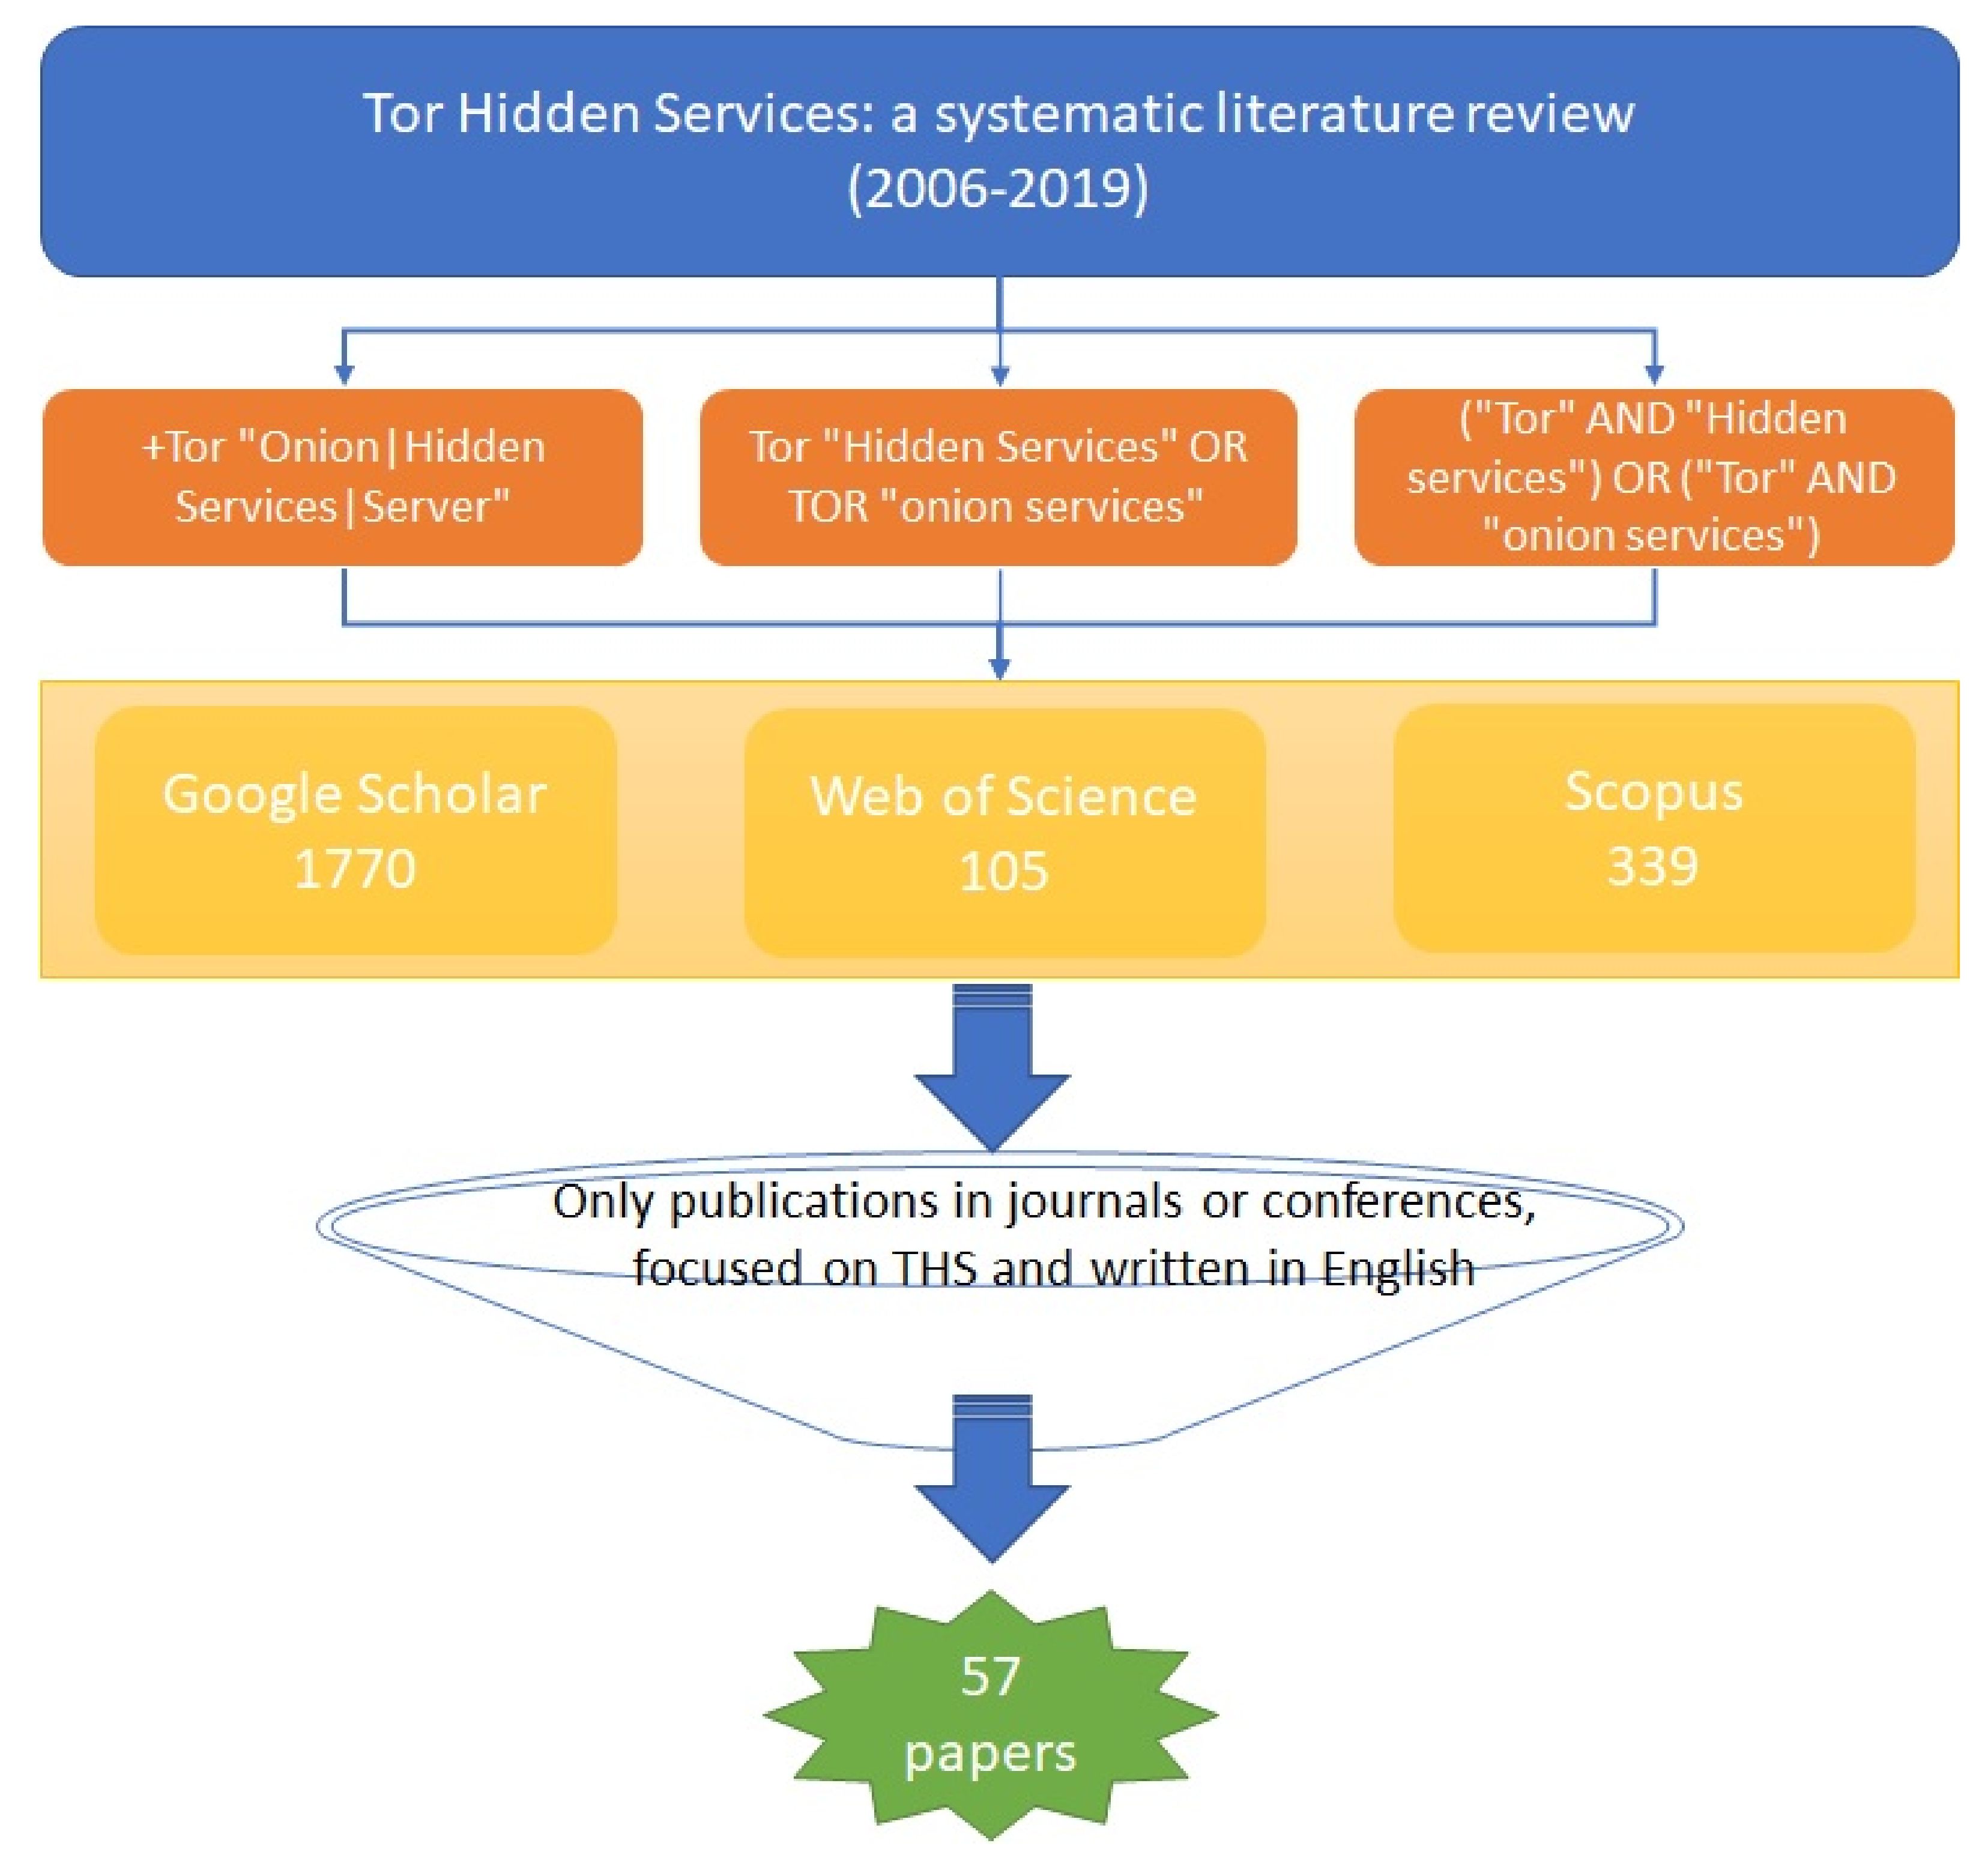 Towards an Automated Process to Categorise Tor's Hidden Services